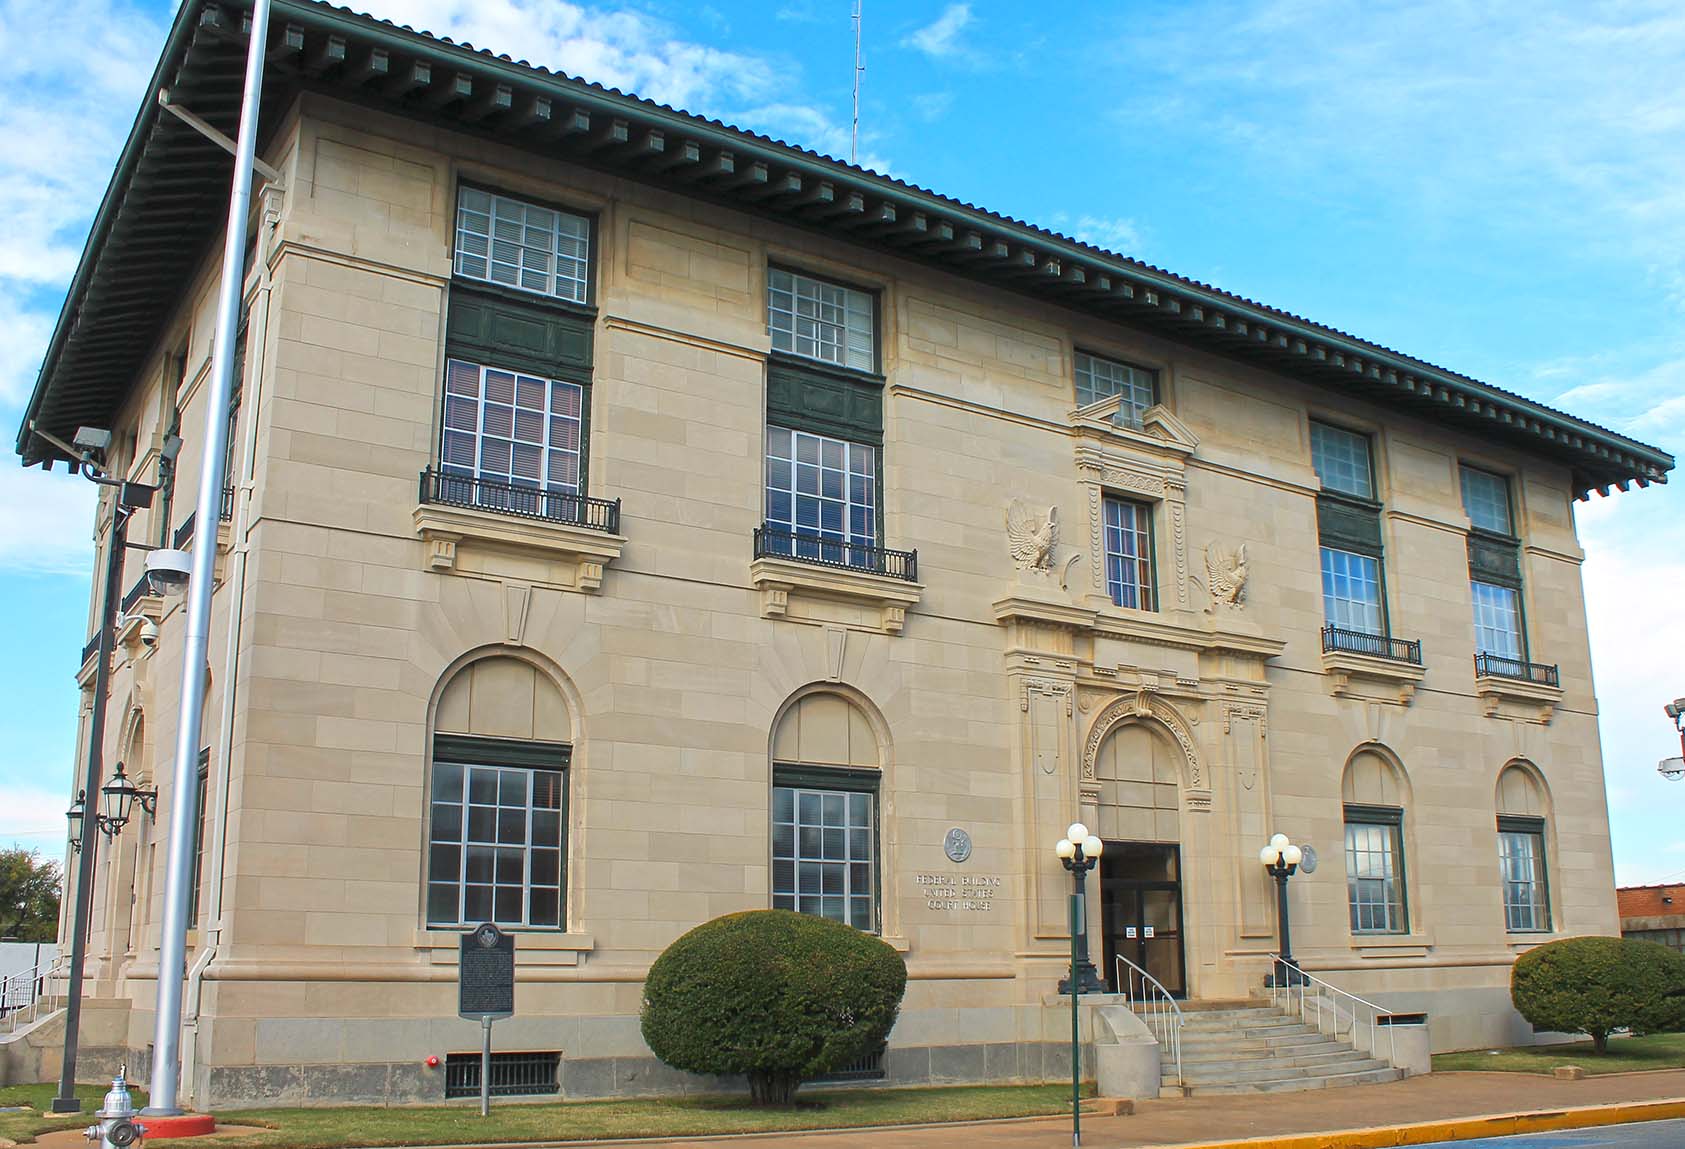 Exterior of Federal Courthouse in Sherman TX By Renelibrary - Own work, CC BY-SA 3.0, https://commons.wikimedia.org/w/index.php?curid=29912671